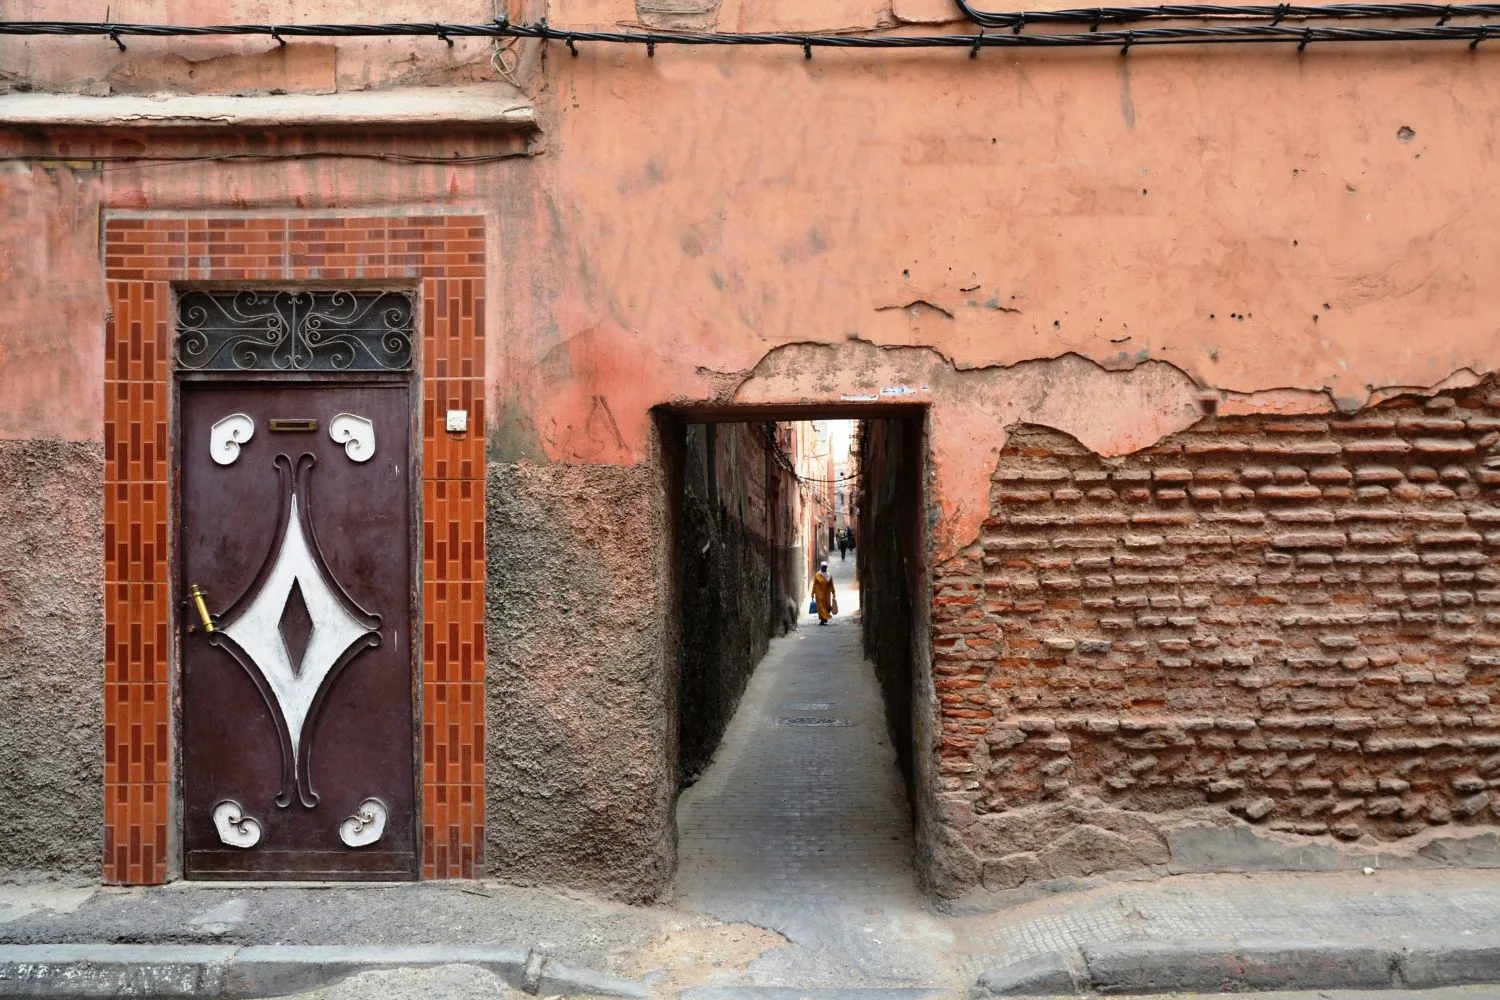 A narrow alley in the old Jewish quarter (Mellah) in Marrakech, Morocco.